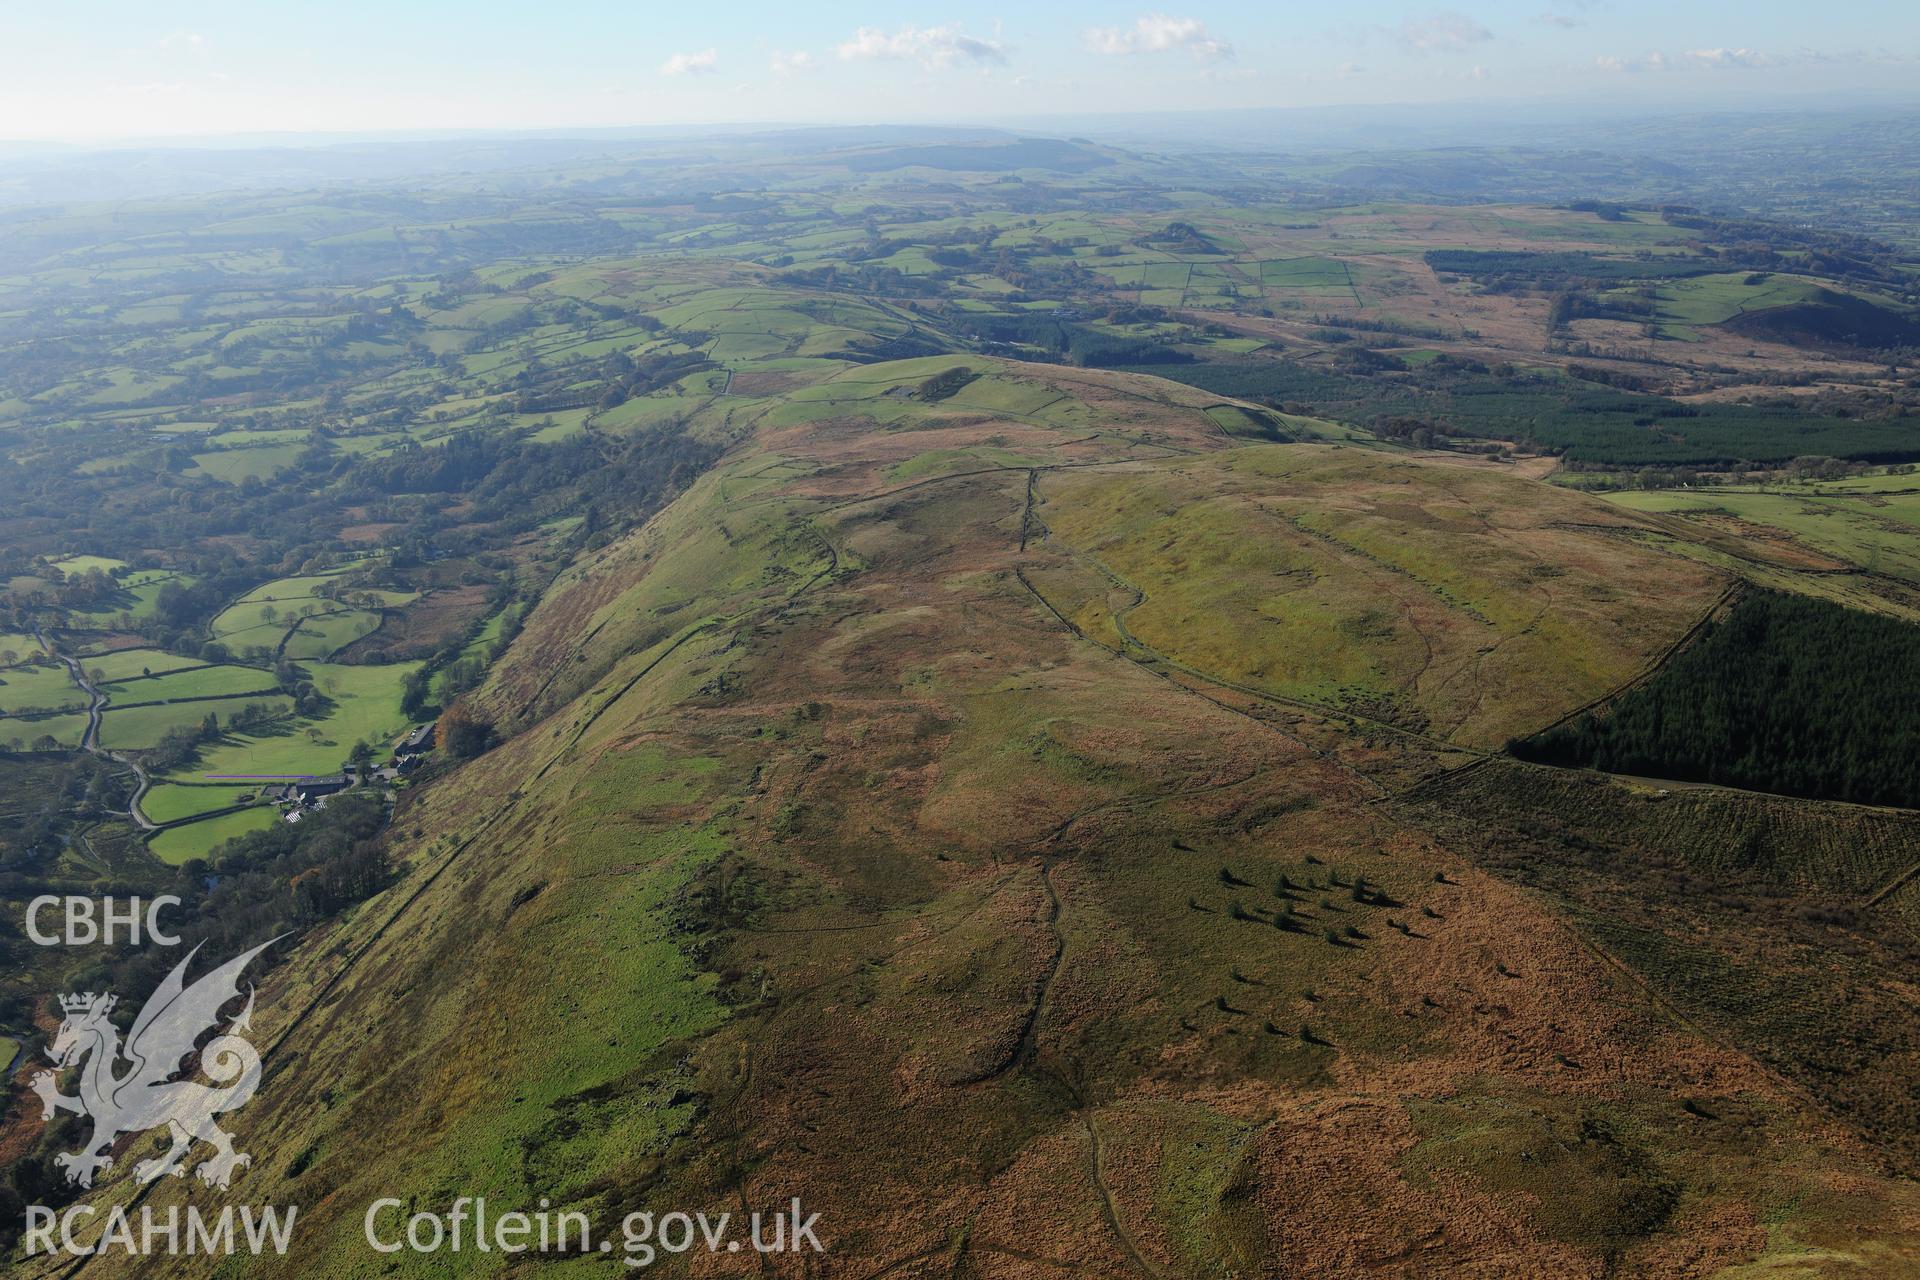 RCAHMW colour oblique photograph of Moelfryn DRS, and landscape view looking south-west. Taken by Toby Driver on 05/11/2012.